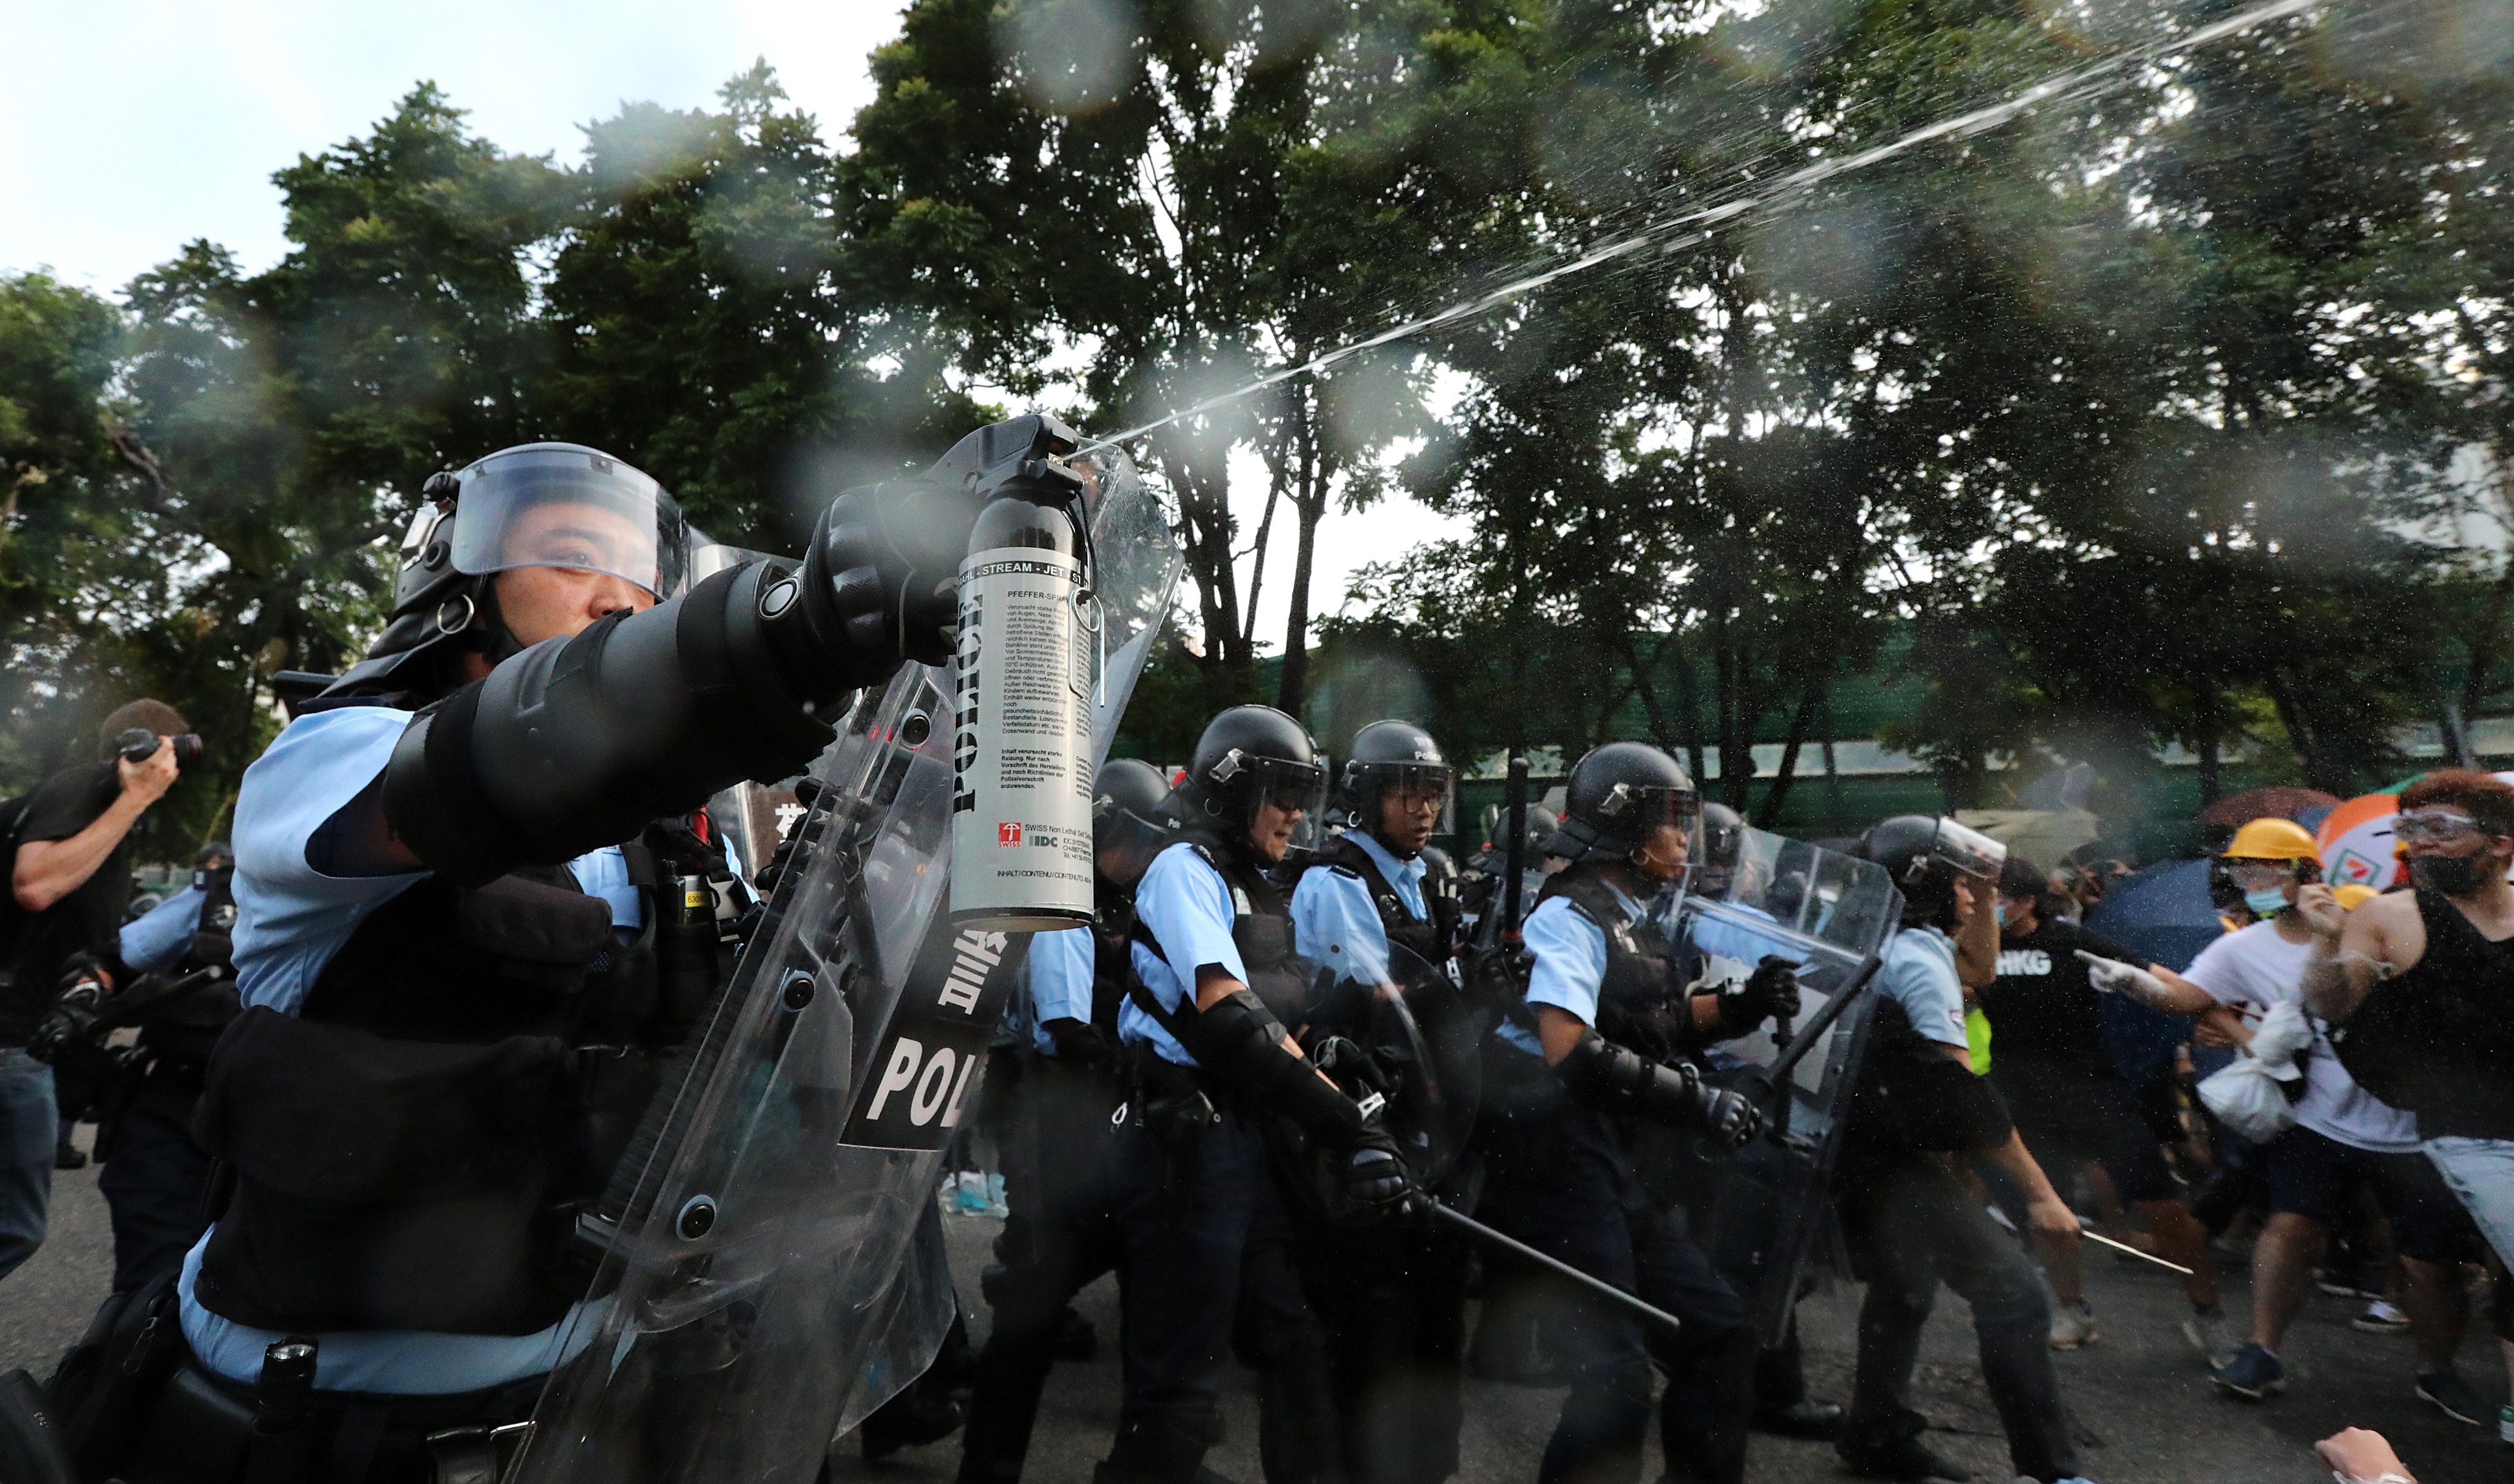 Protesters clash with police after a march in Sheung Shui on July 13, 2019. Photo: Felix Wong